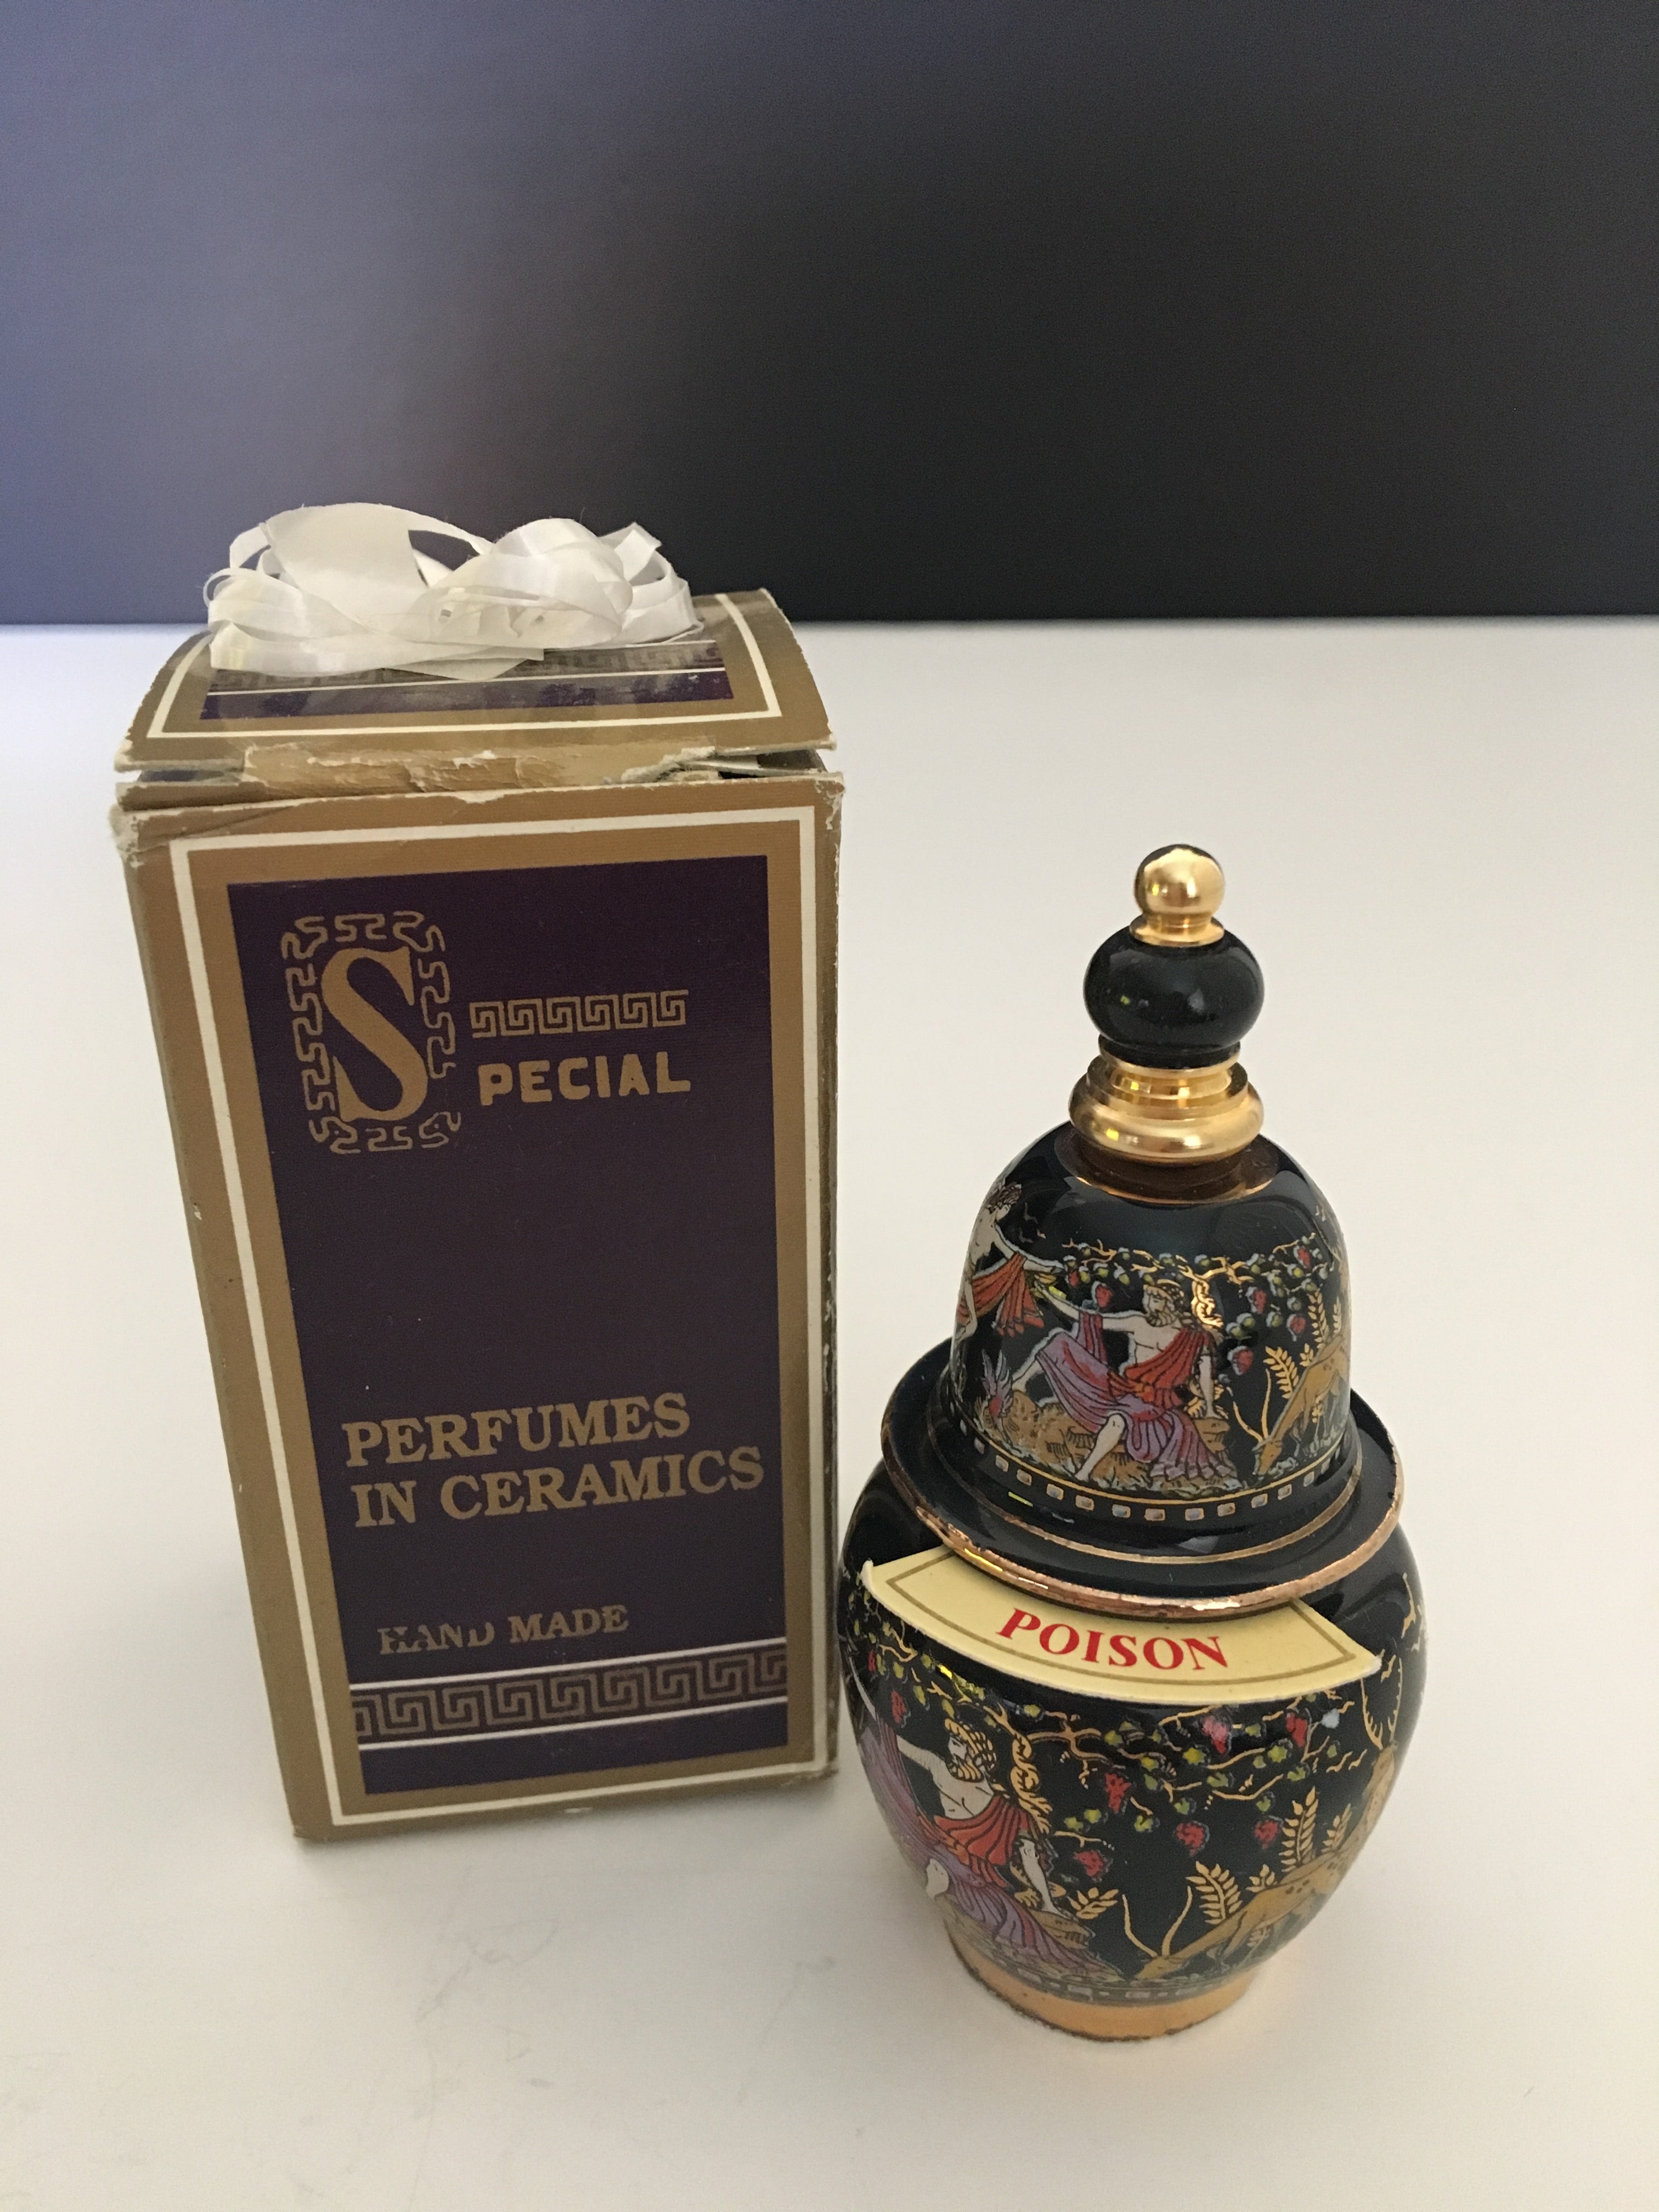 Venus Perfume in Ceramic Special Series made in Greece with Poison